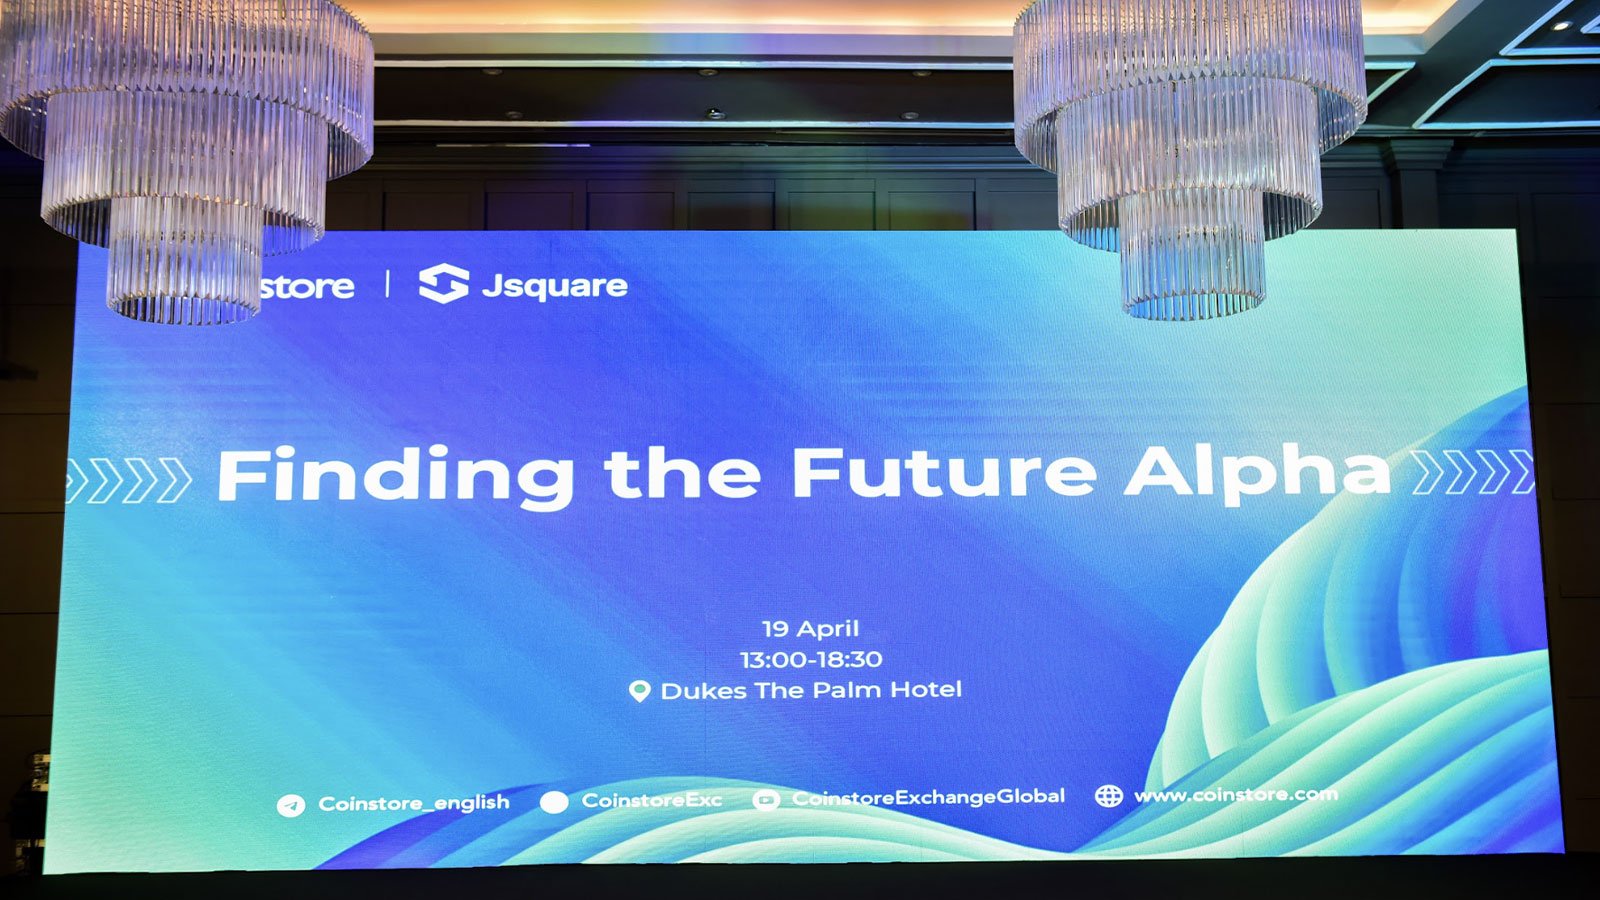 Coinstore New Public Chain Forum “Finding the Future Alpha” Has Completed Successfully